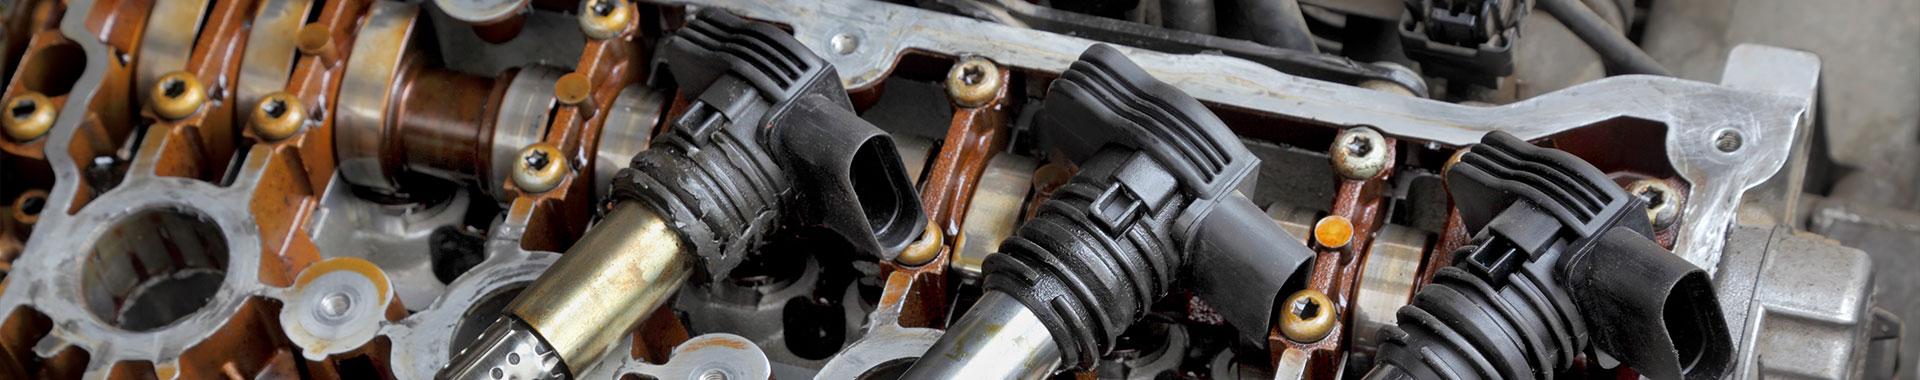 How To Replace Faulty Ignition Coils?